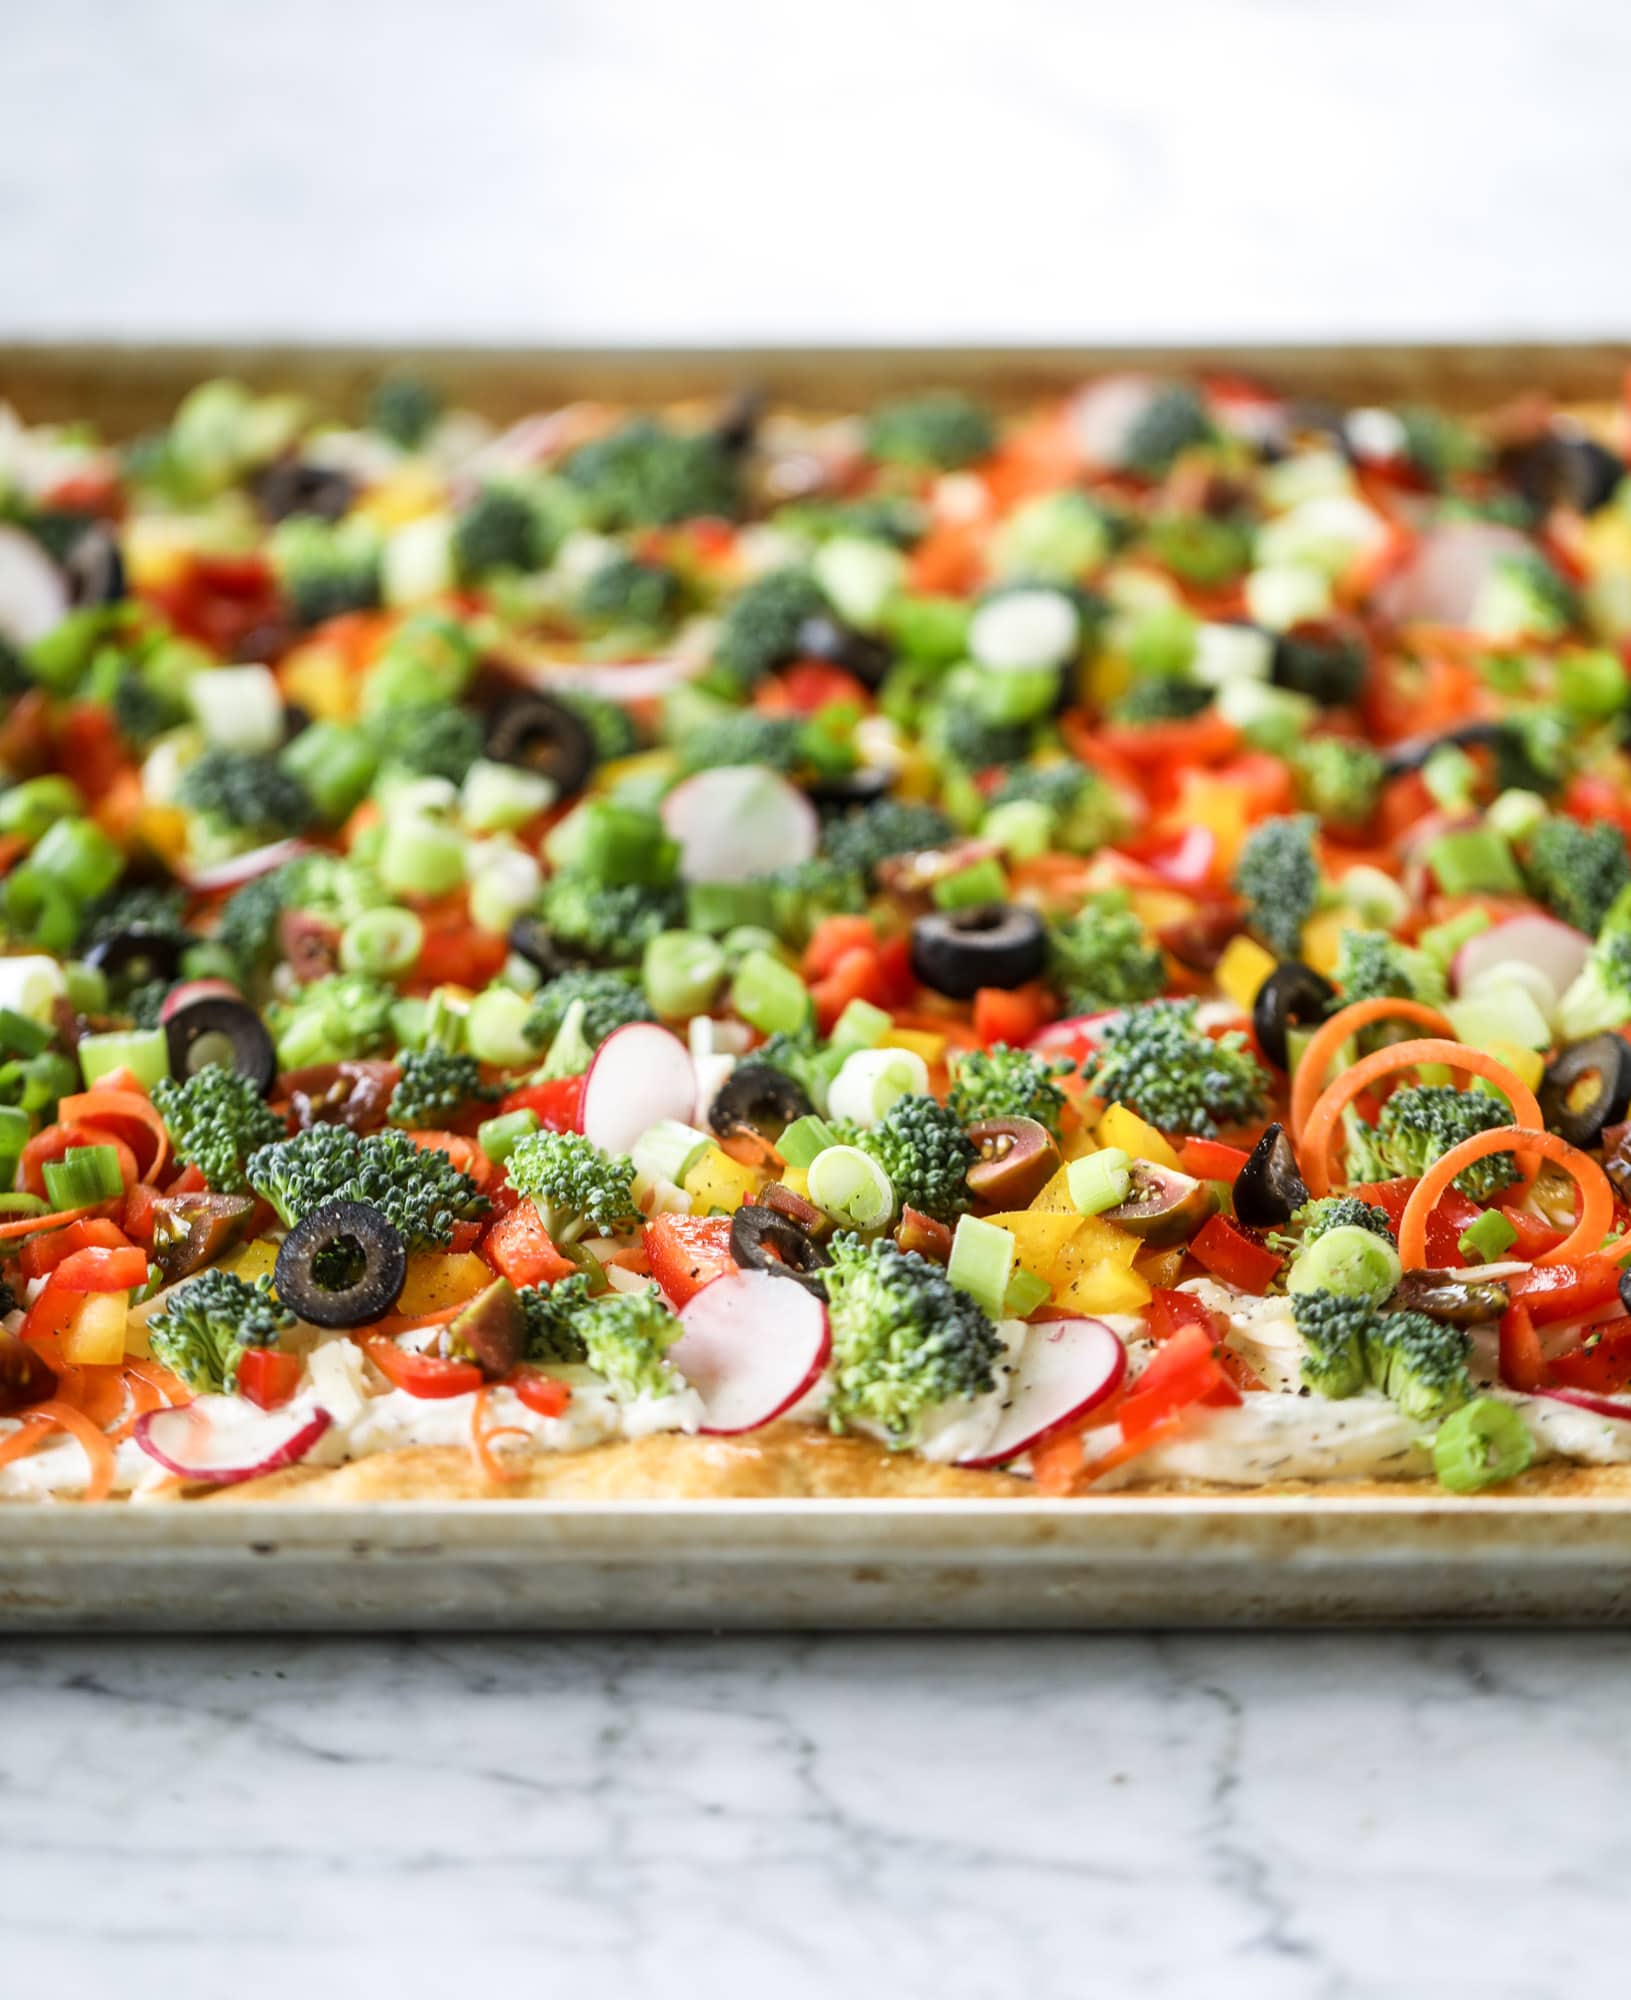 My mom's classic appetizer, the old school veggie pizza, is perfect for summer parties both indoor and out! A flaky pastry crust, a flavorful mascarpone greek yogurt base and tons of fresh chopped vegetables on top. It's a winning combination! I howsweeteats.com #veggie #pizza #appetizer #summer #crescentrolls #greekyogurt